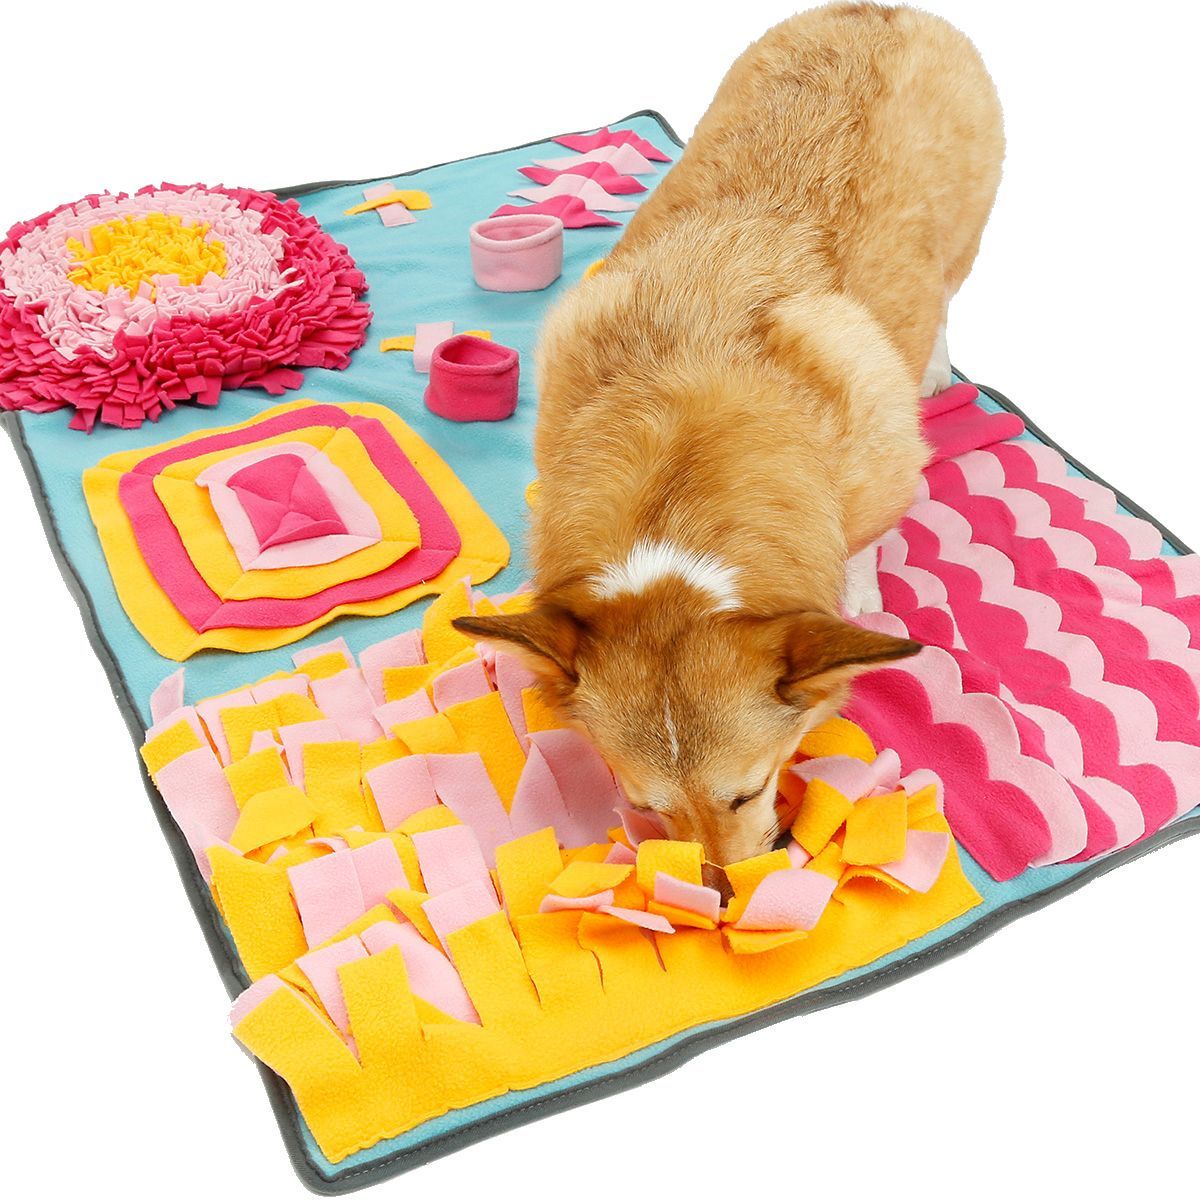 Pet Snuffle Mat Dogs Sniffing Nosework Feeding Mat Slow Feeder